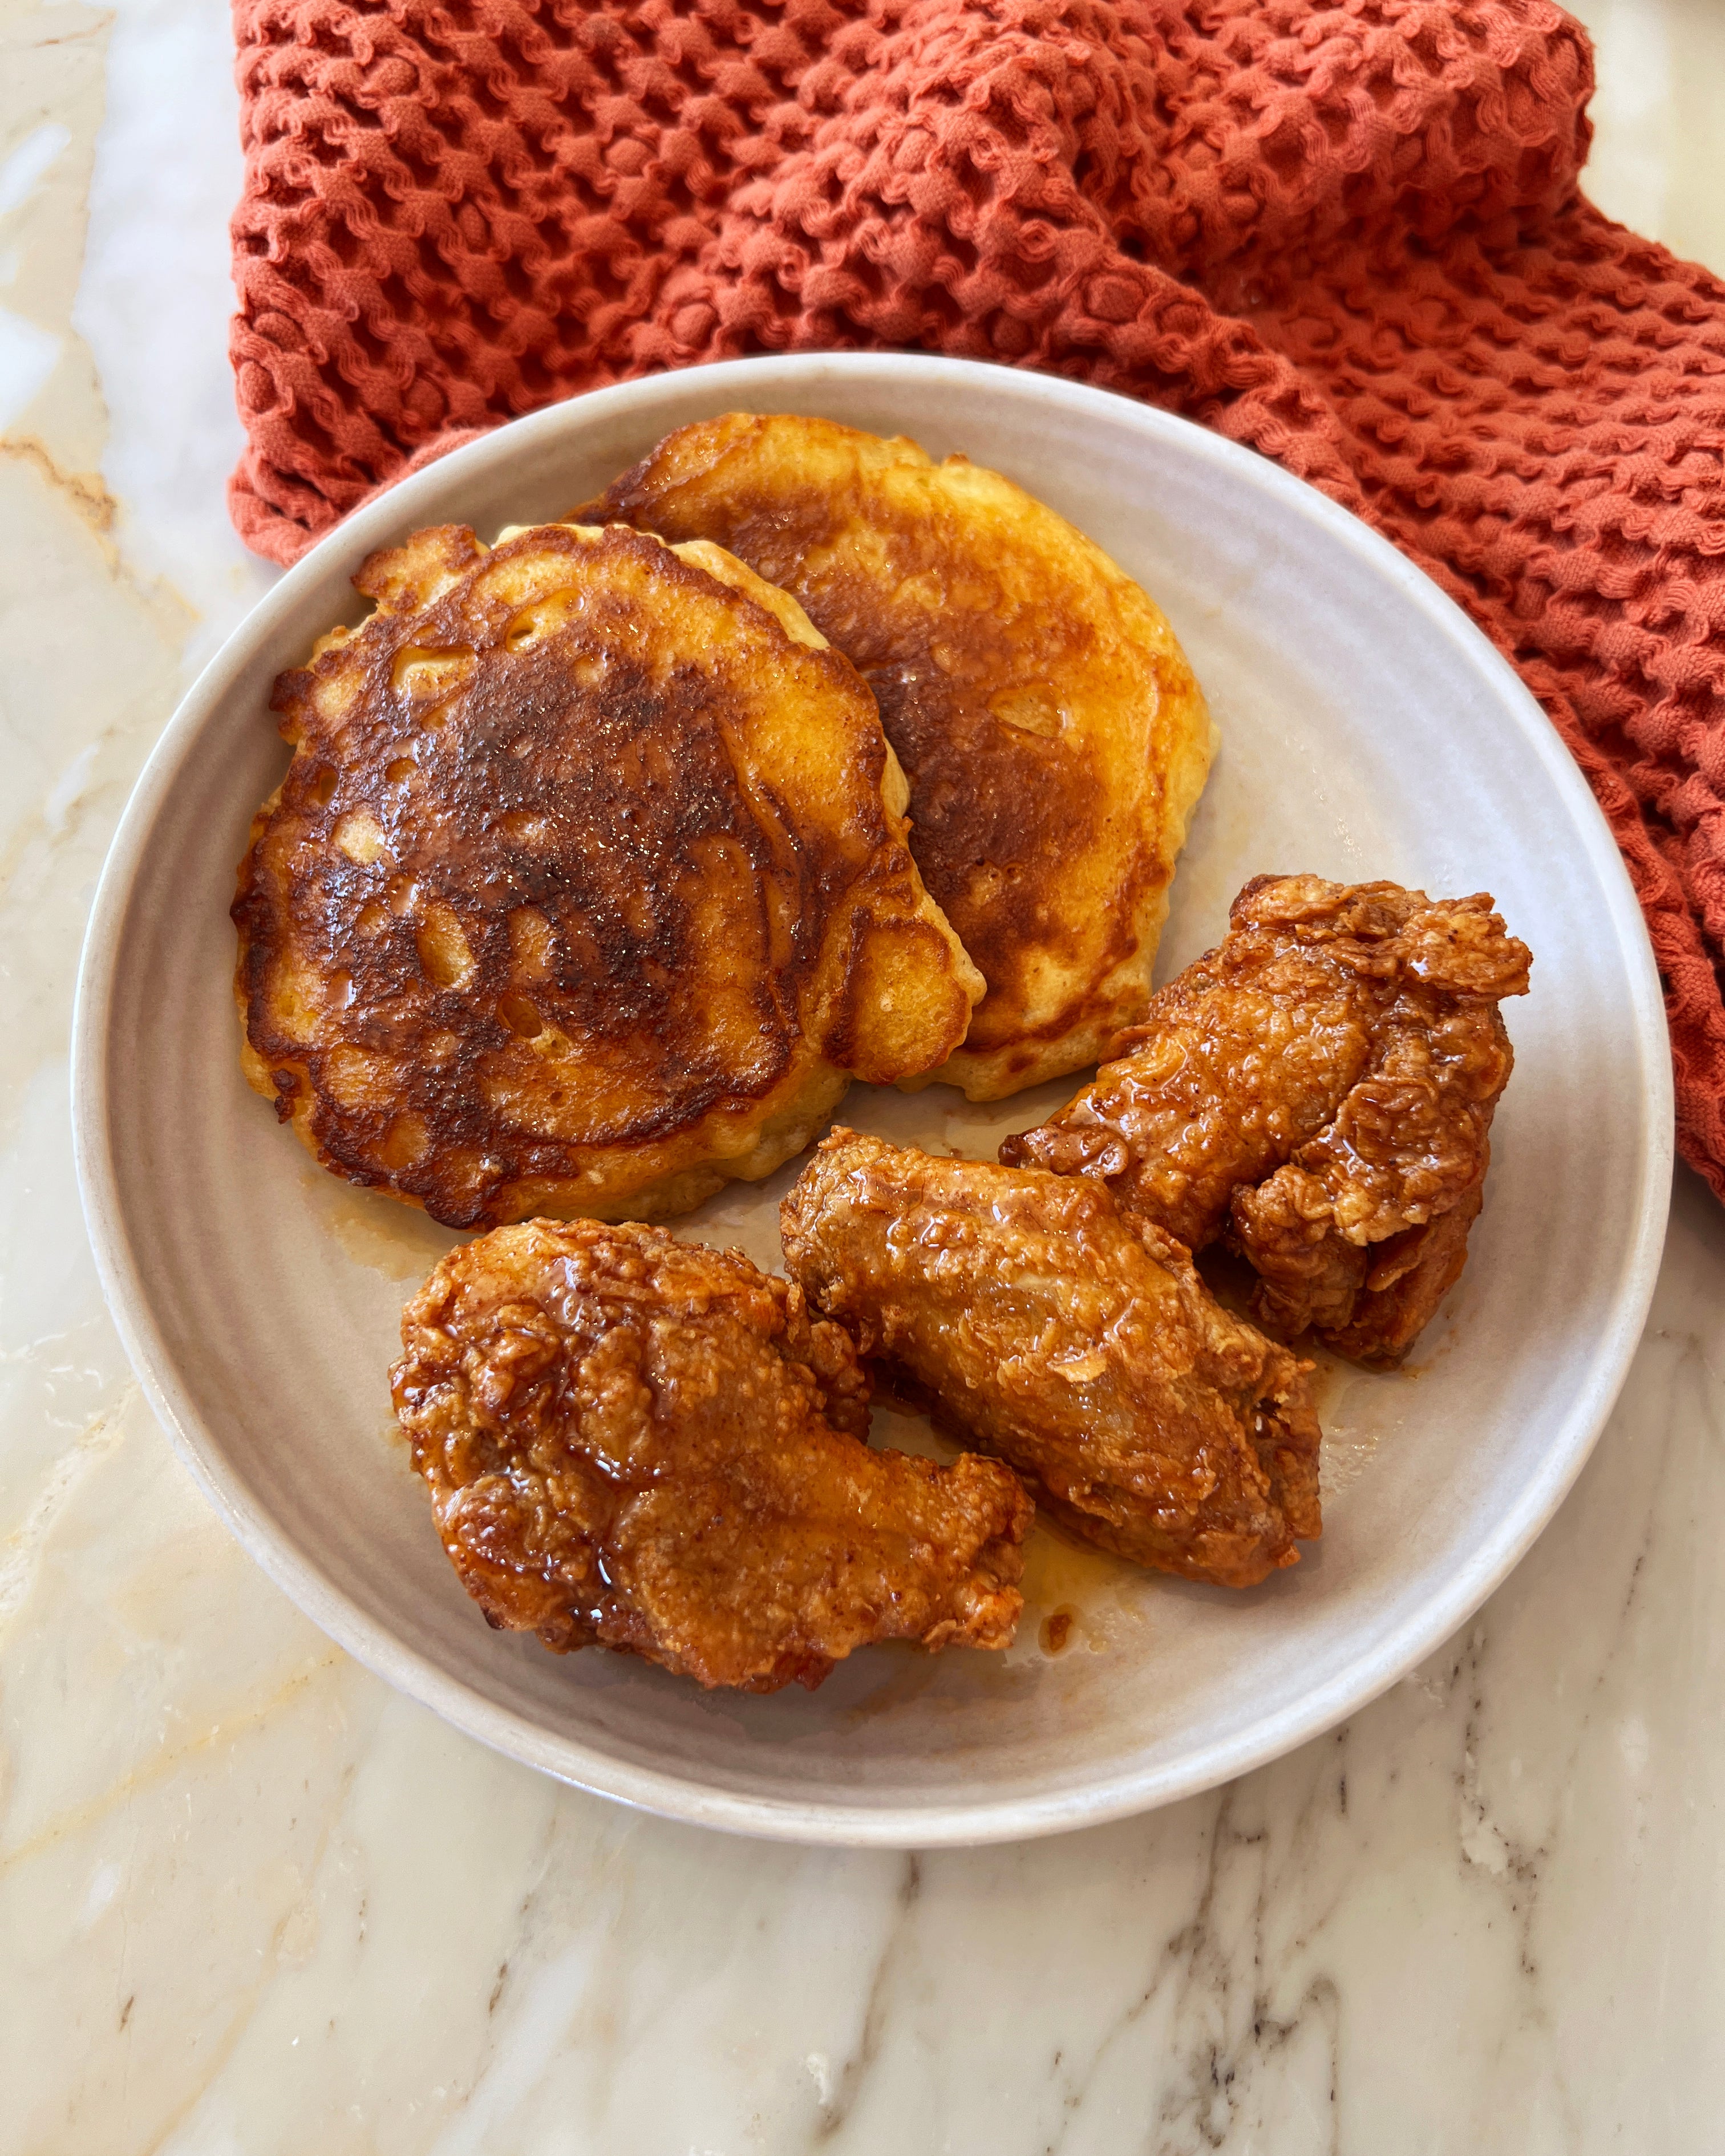 John's Fried Chicken and Pancakes with Smoked Honey Butter